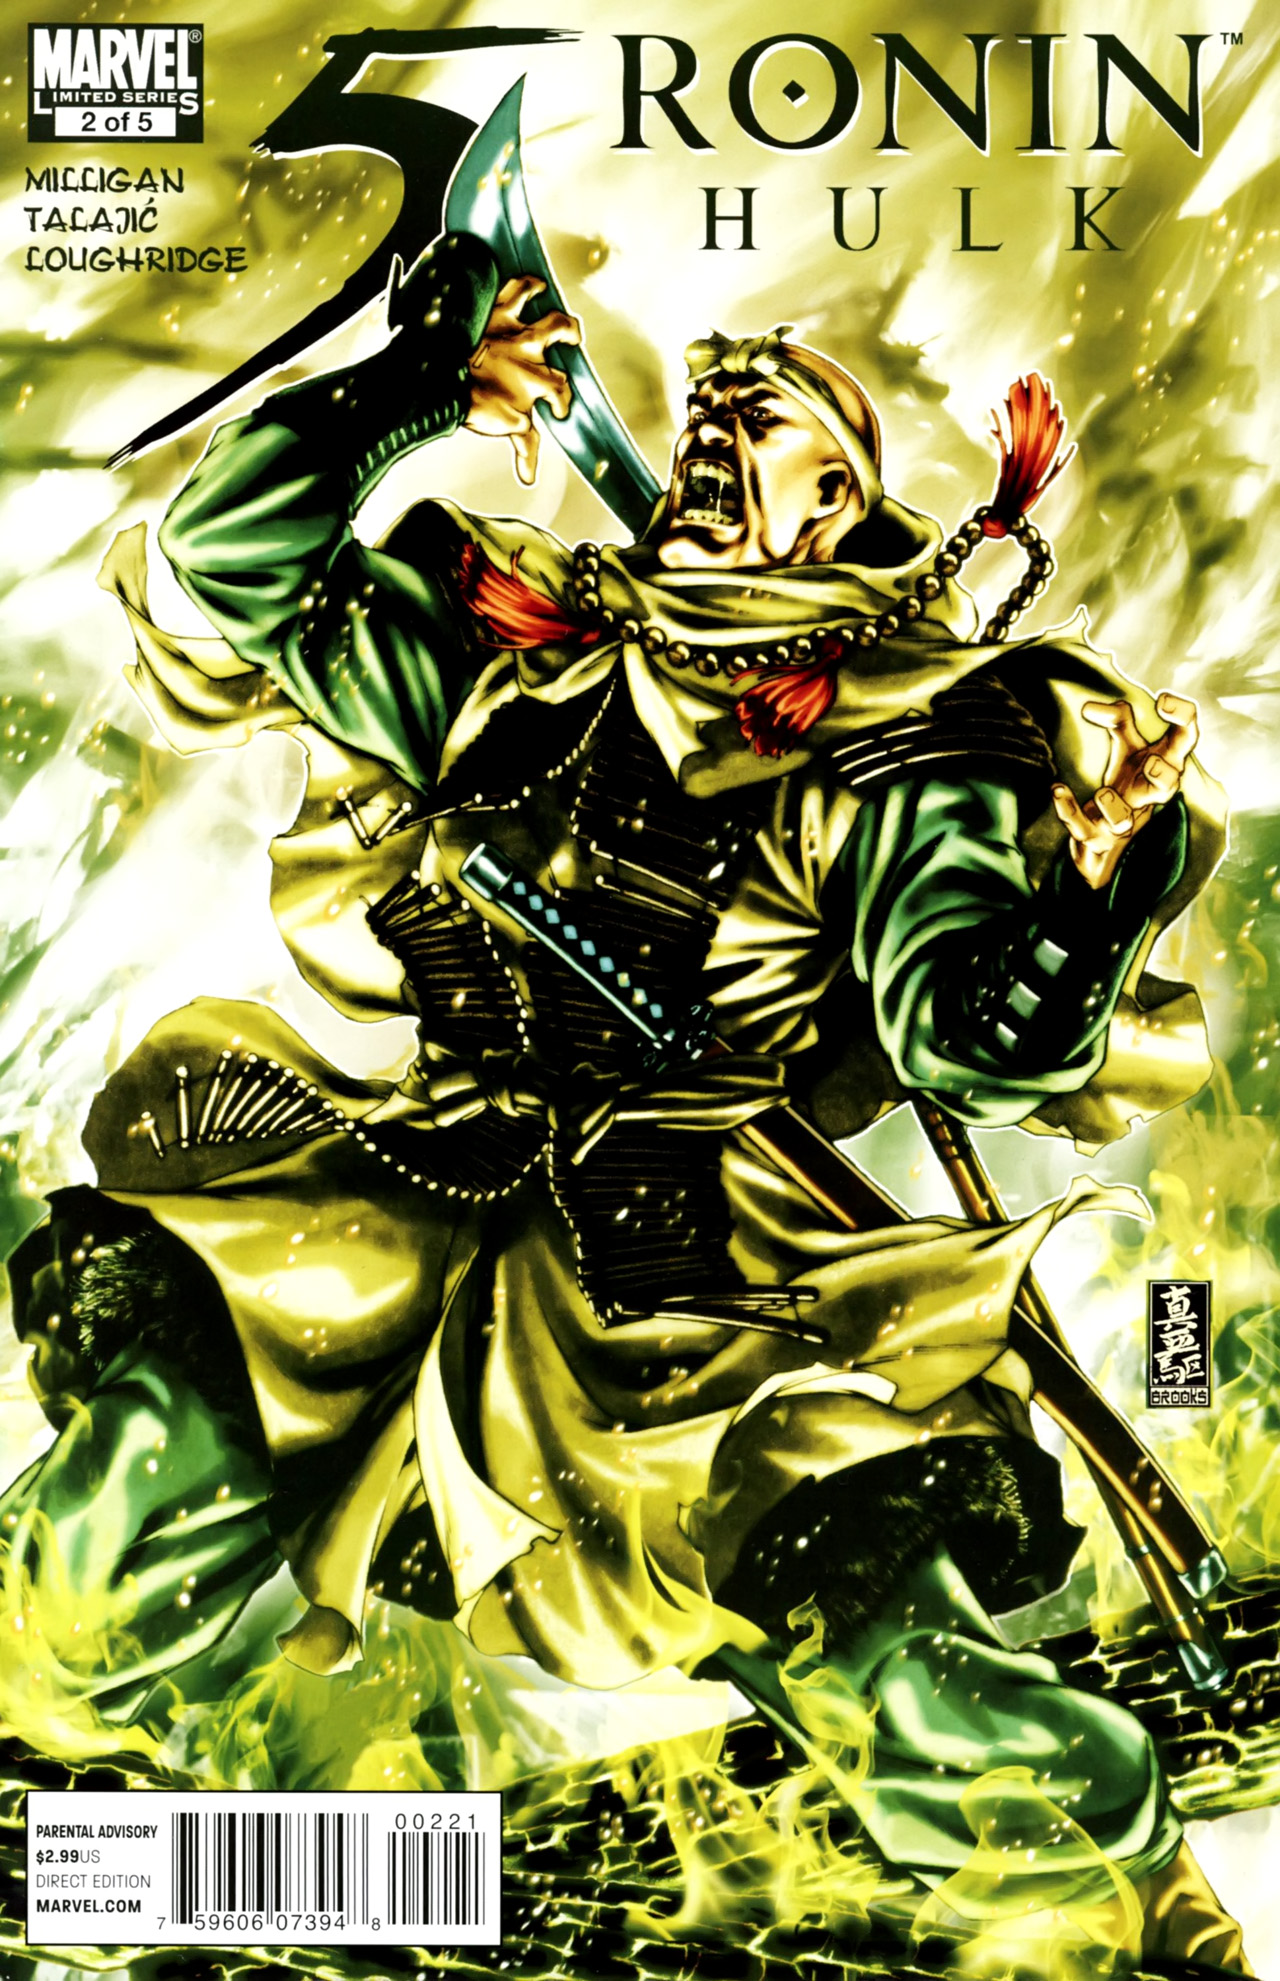 5 Ronin #2 - Chapter Two: The Way Of The Monk - Hulk